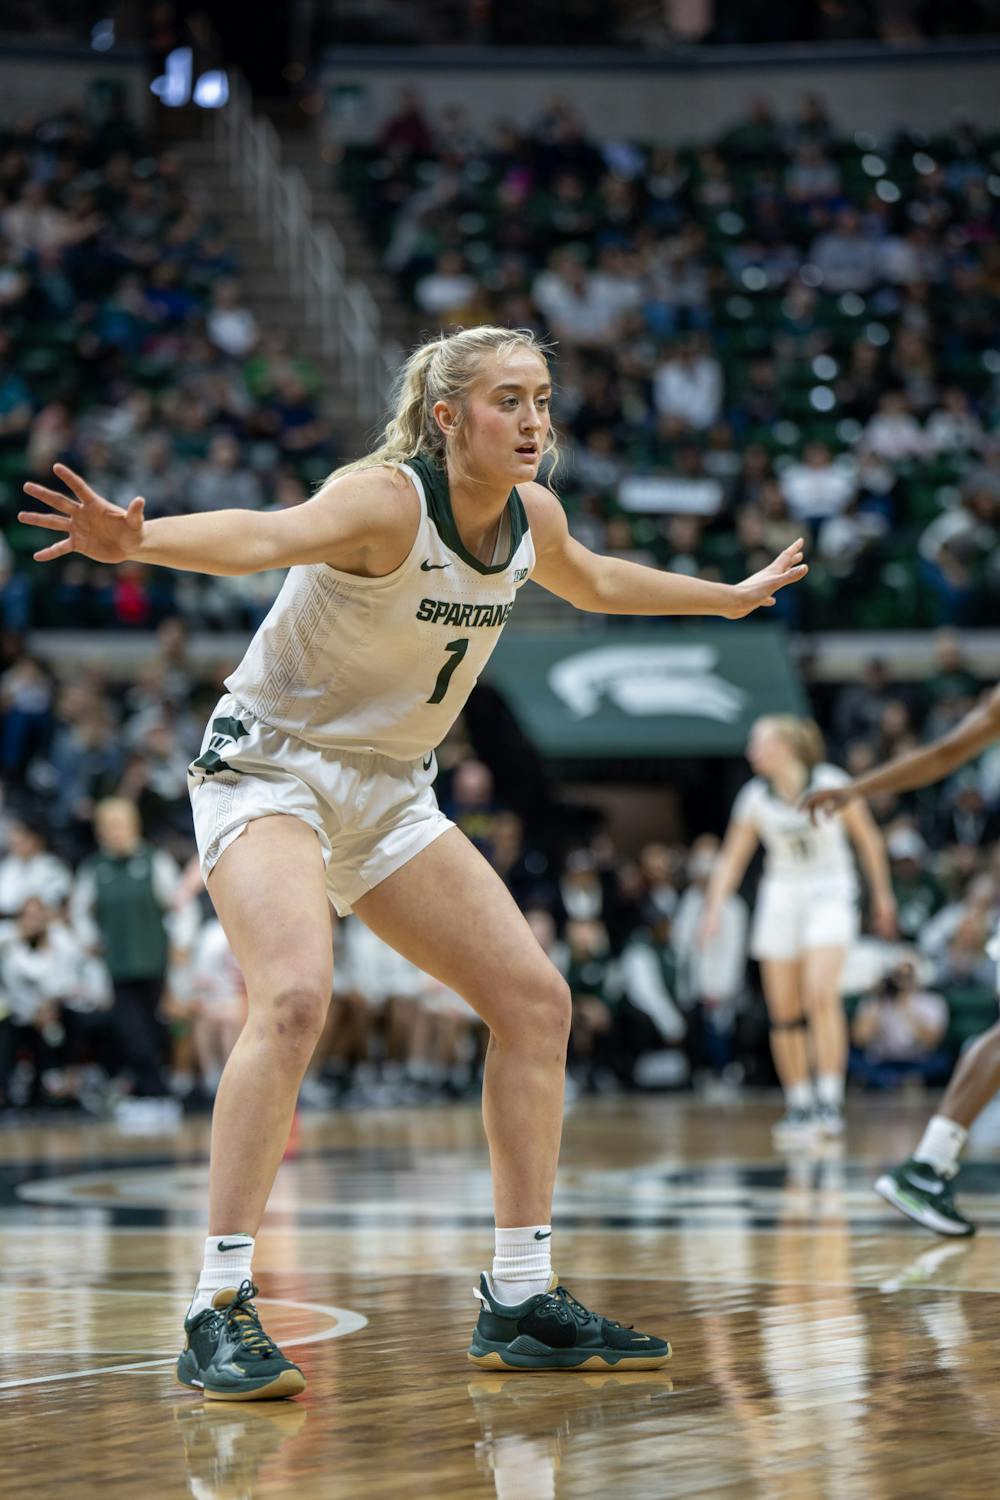 <p>Senior guard/forward Tory Ozment as she plays defense during the MSU v. Rutgers game held at the Breslin Center on Jan. 22, 2023. The Spartans won against Rutgers 85-63.&nbsp;</p>